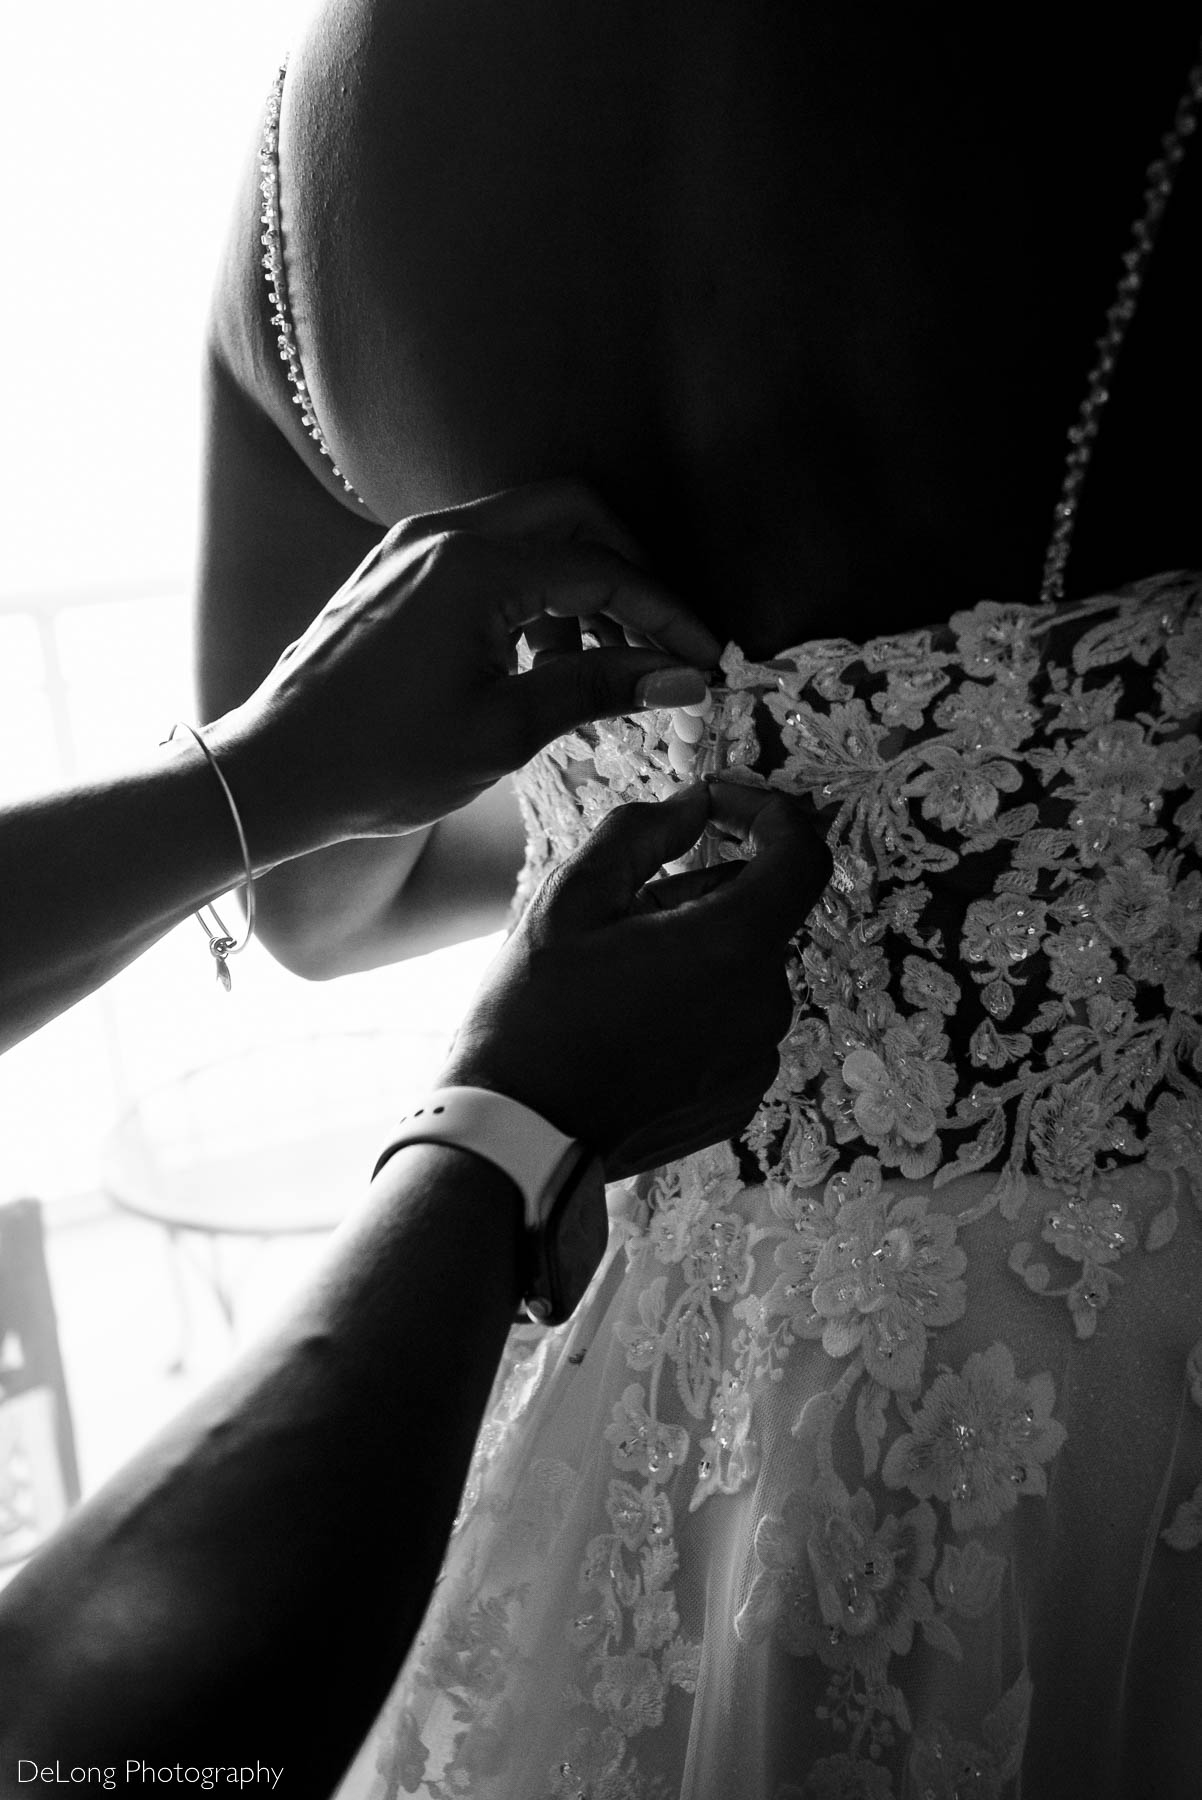 Black and white close-up photograph of the bride's friend's hands zipping up her wedding dress at the Ballantyne Hotel by Charlotte wedding photographers DeLong Photography